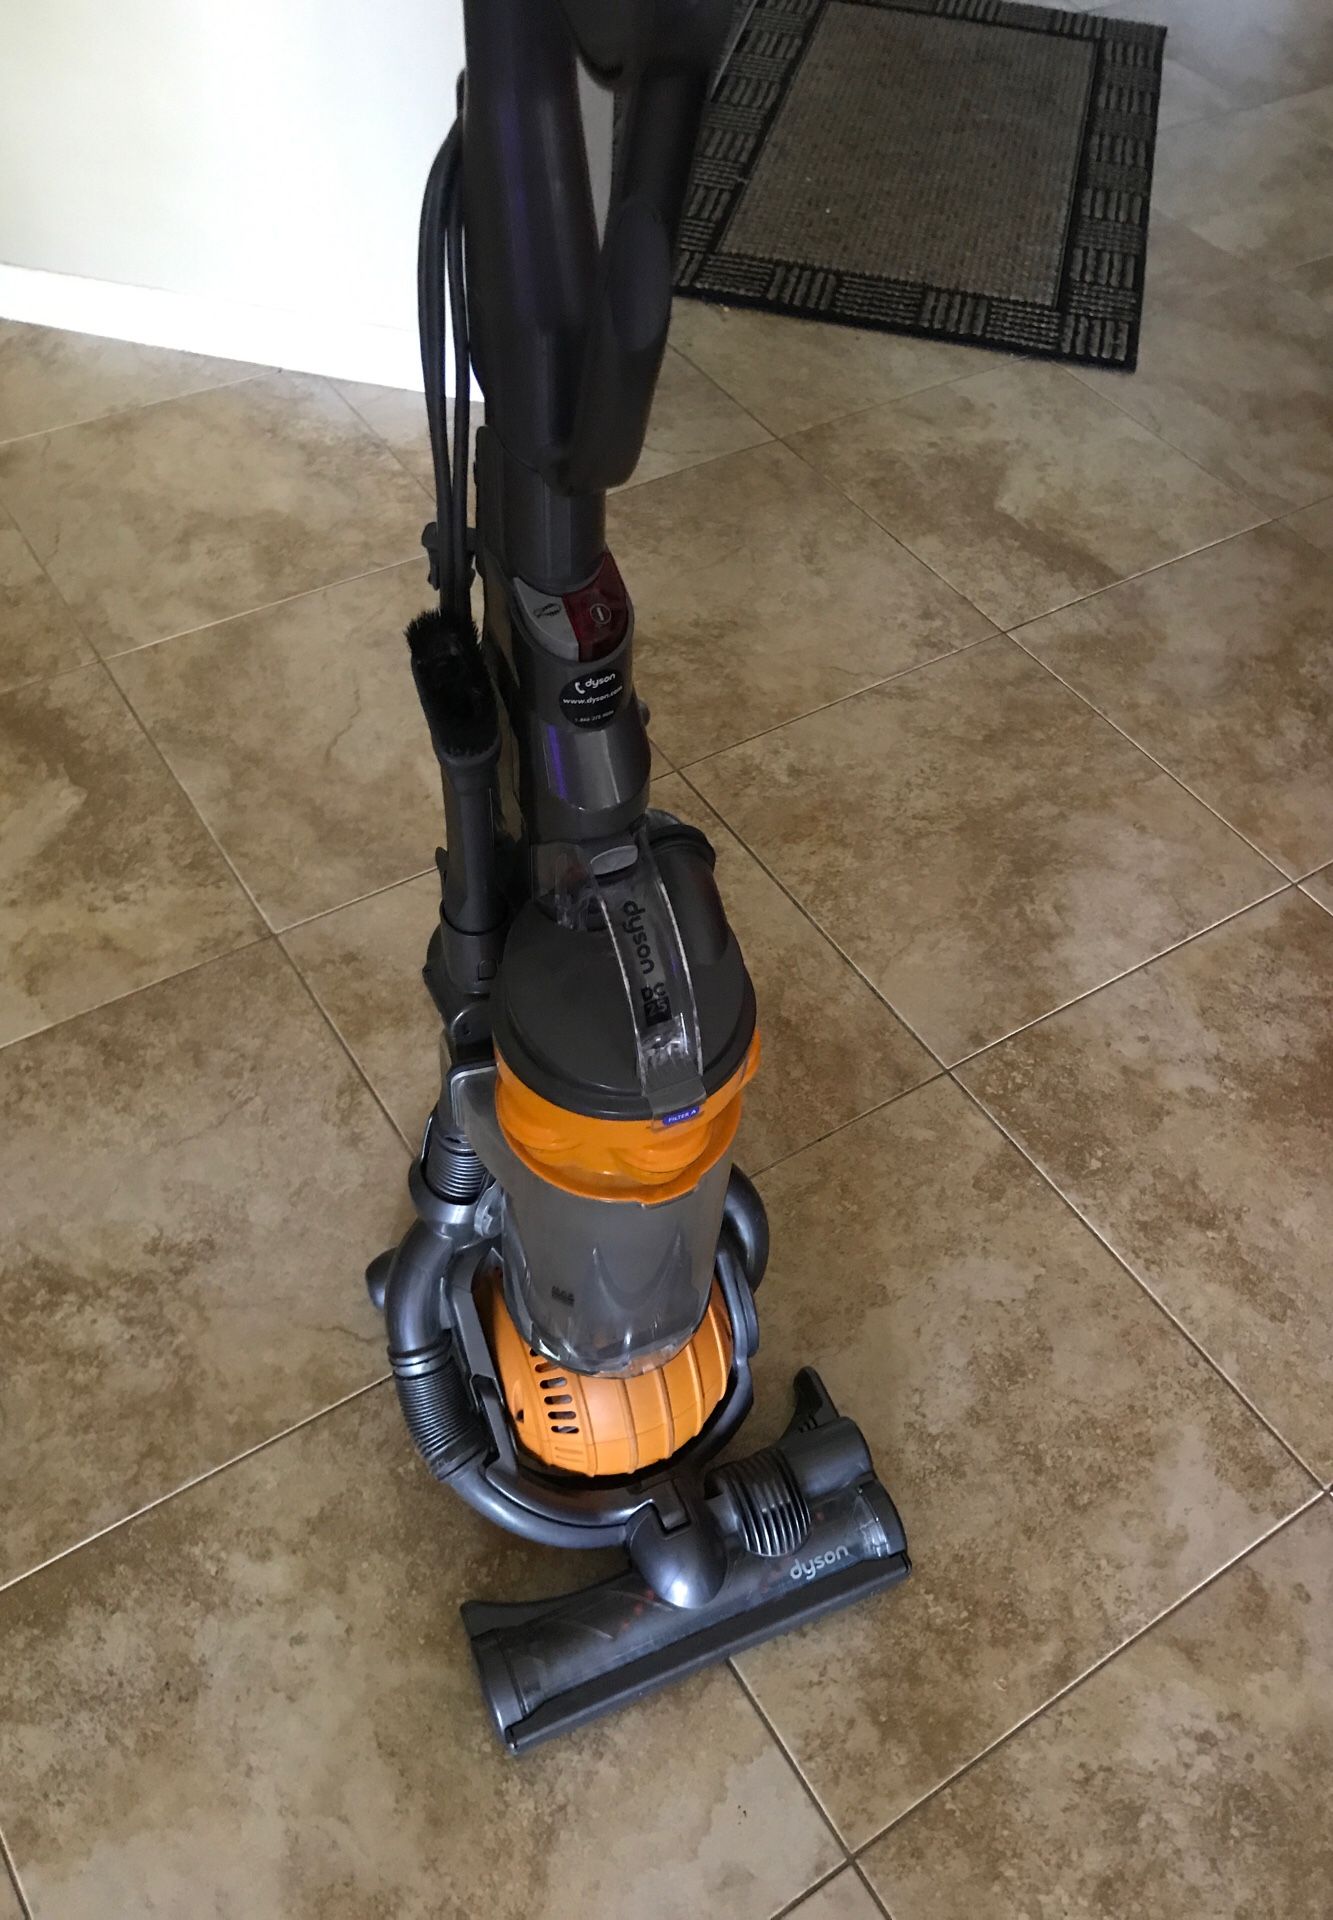 Dy son DC 25 vacuum used